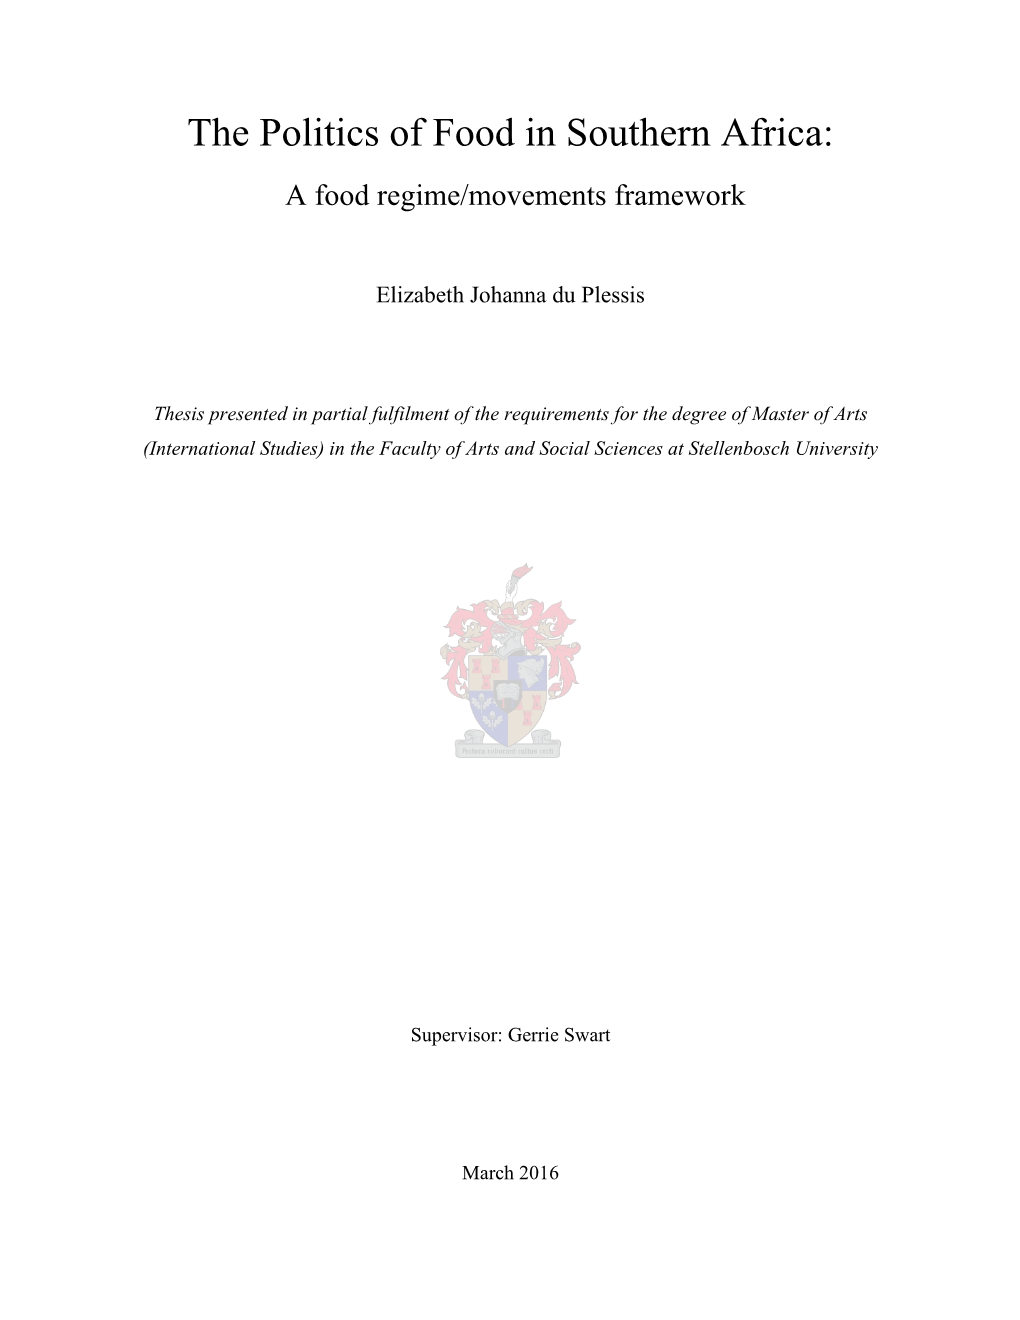 The Politics of Food in Southern Africa: a Food Regime/Movements Framework